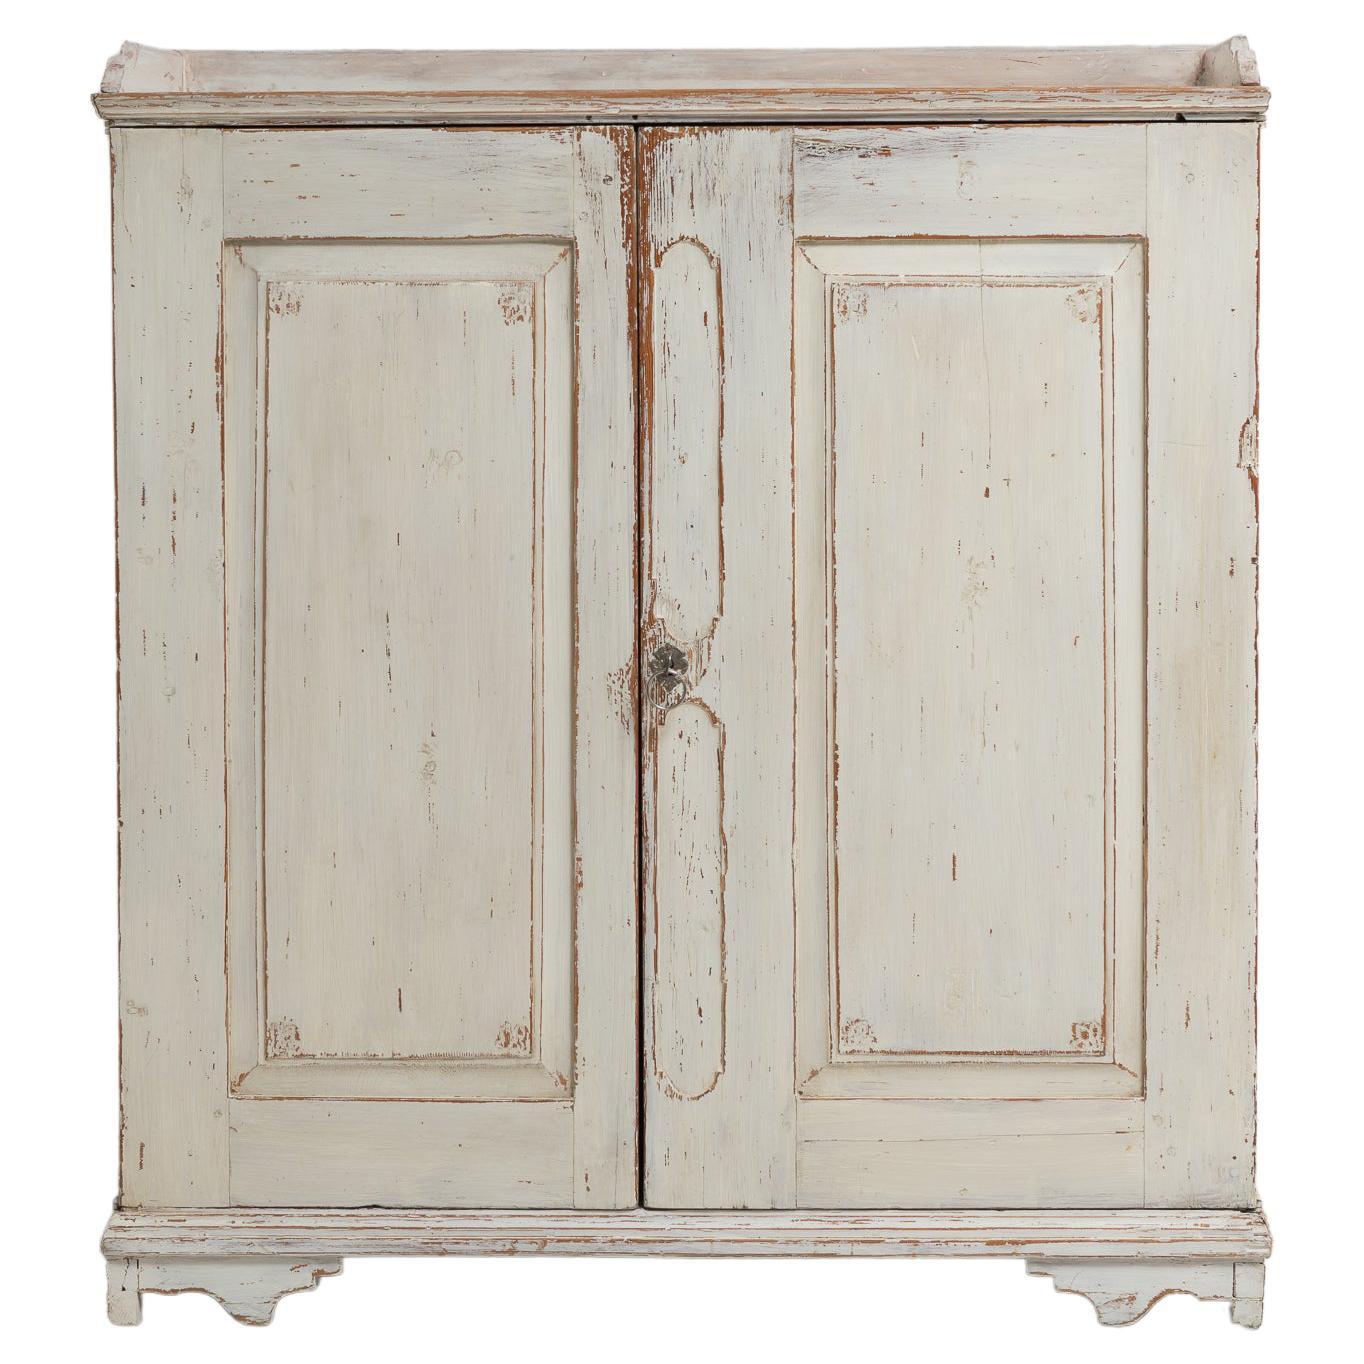 Early 19th Century Swedish Gustavian Country Sideboard